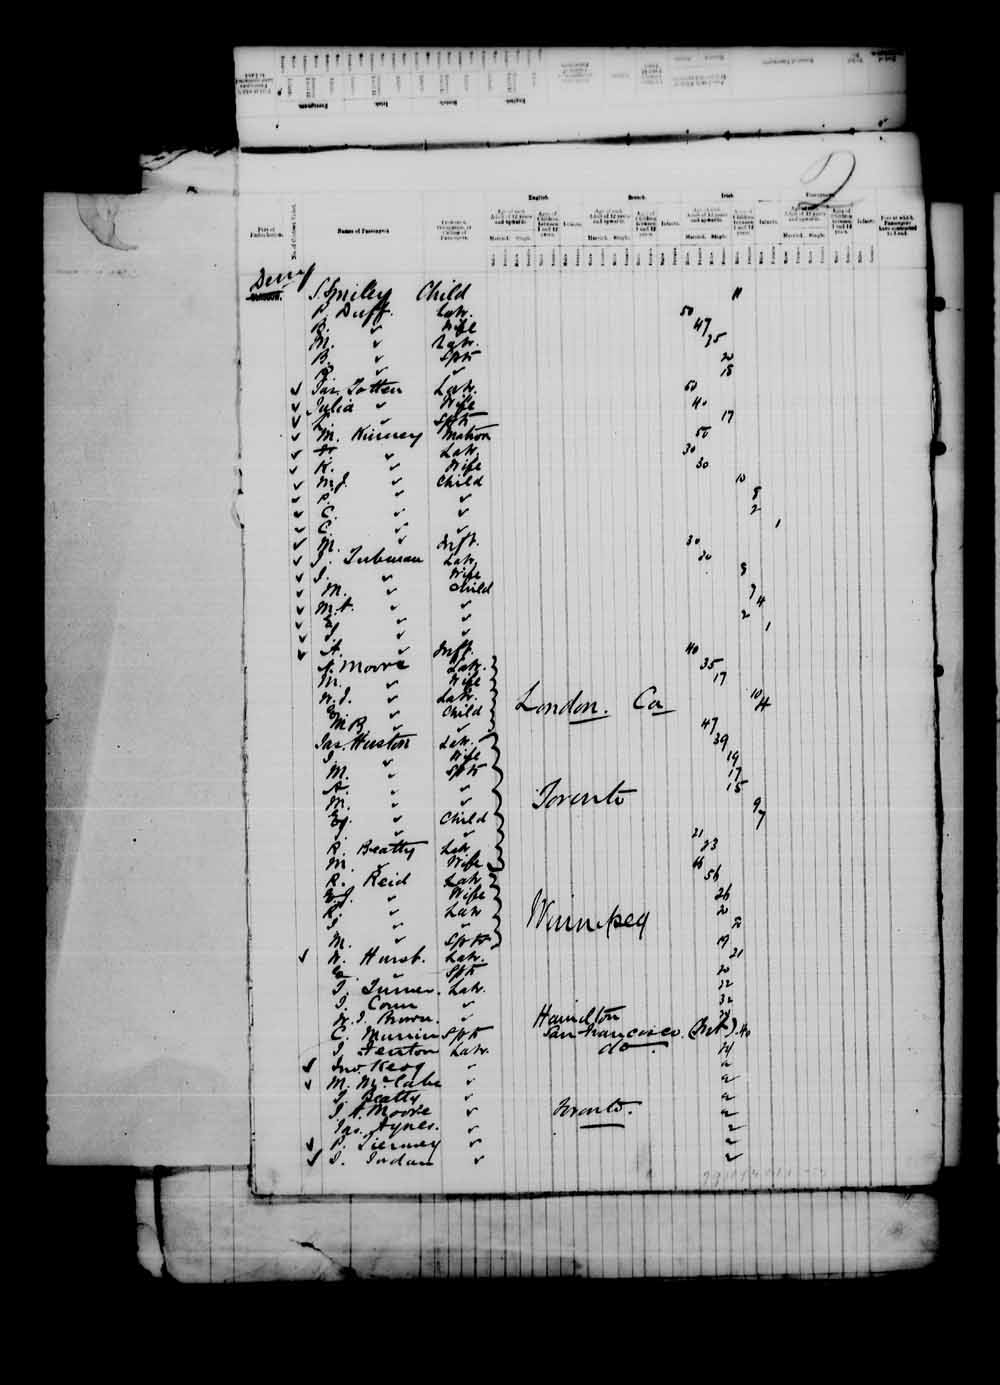 Digitized page of Passenger Lists for Image No.: e003542670